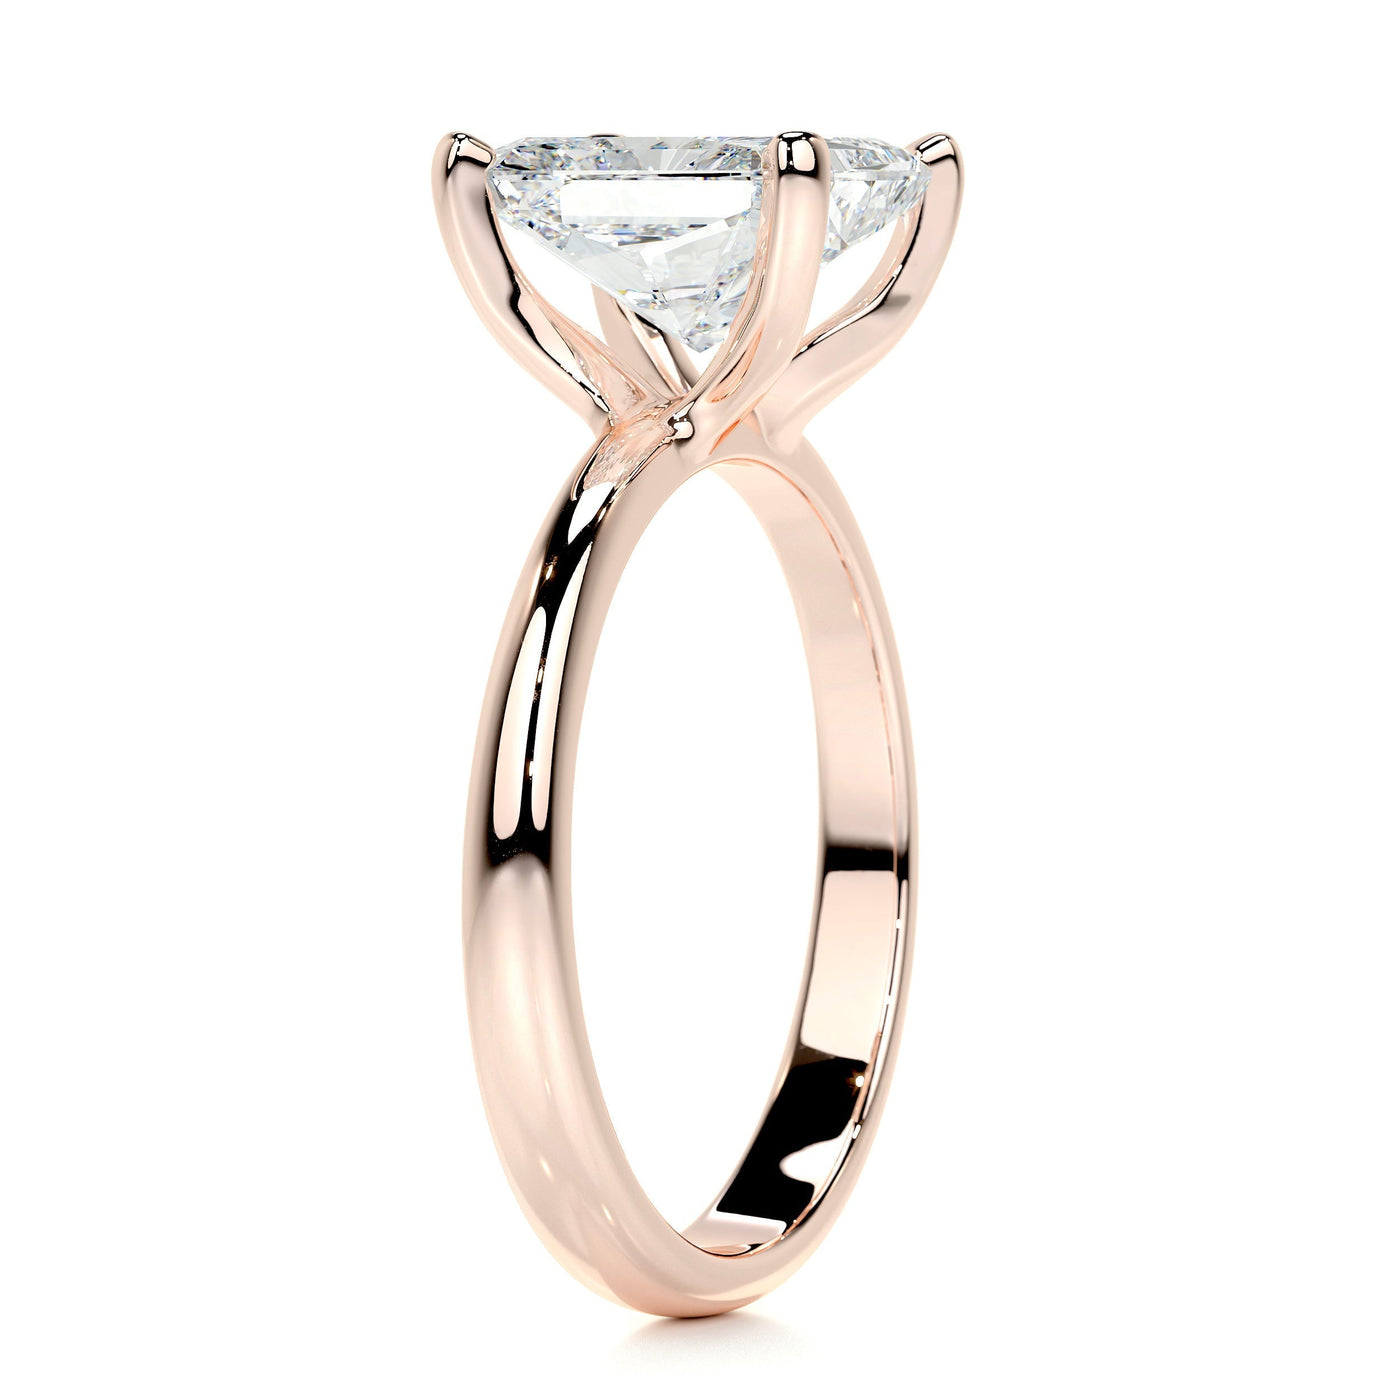 3 Carat Princess Cut Moissanite Solitaire Engagement Ring In 18K Gold